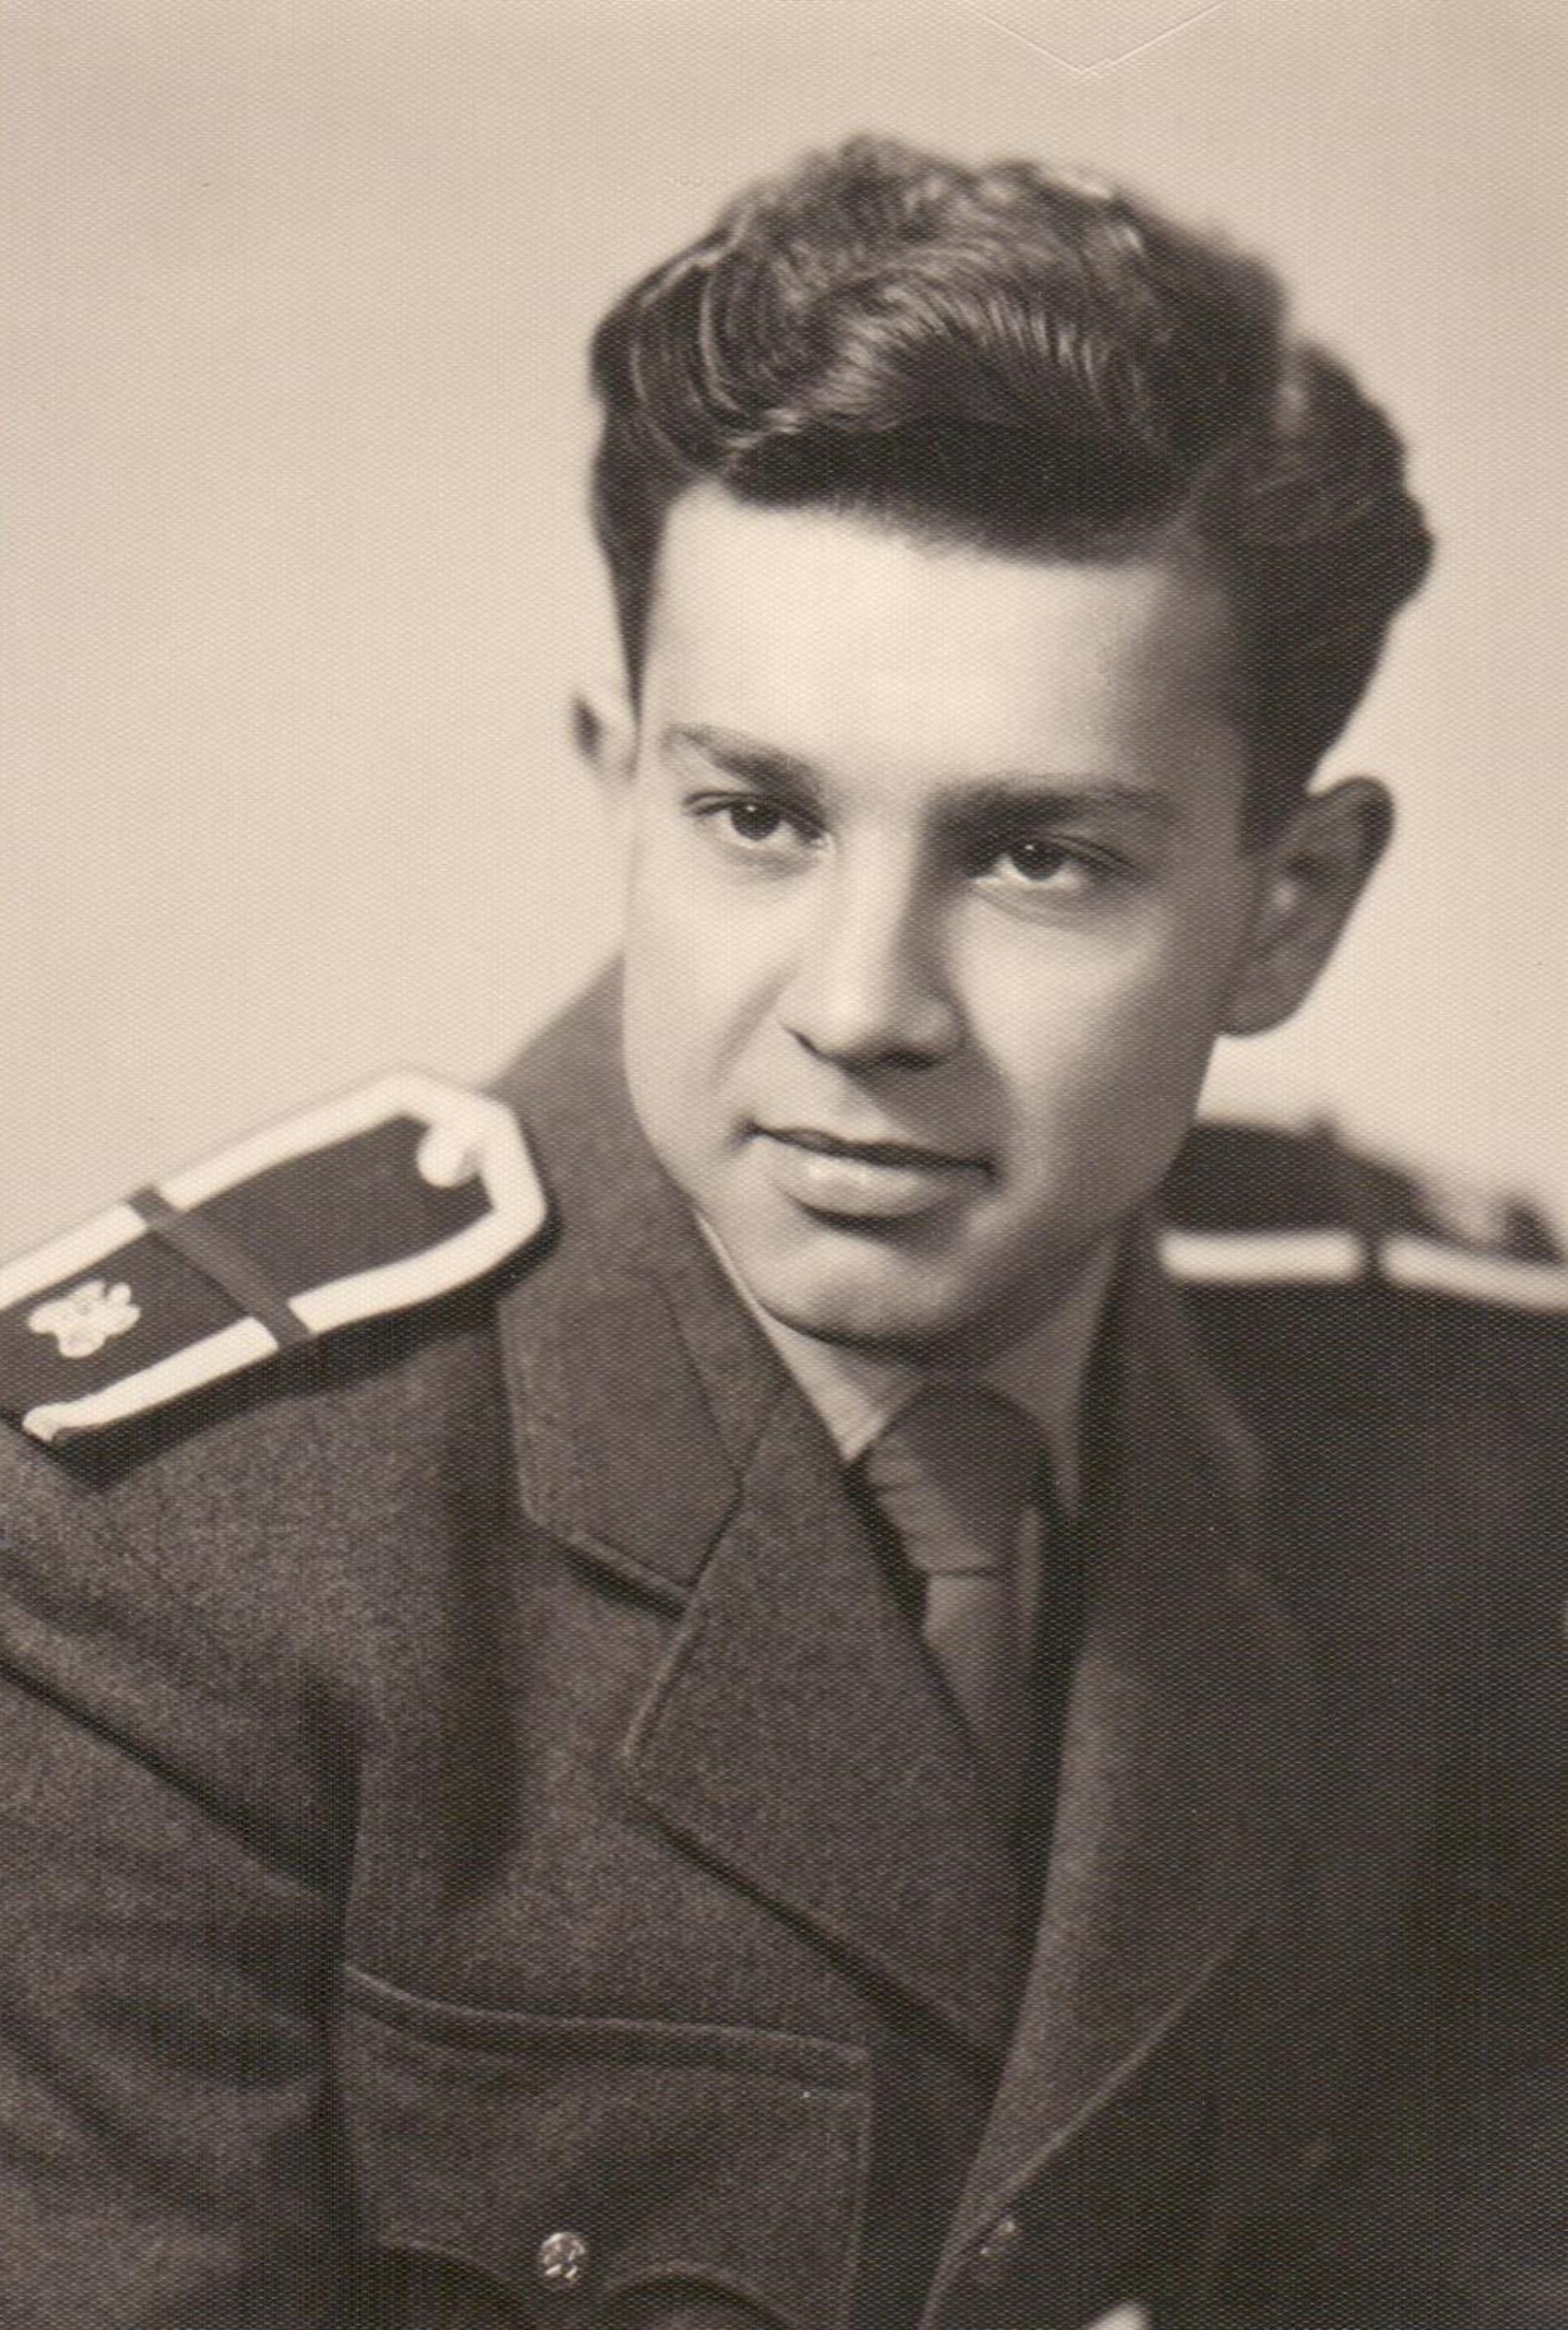 1956; as a soldier